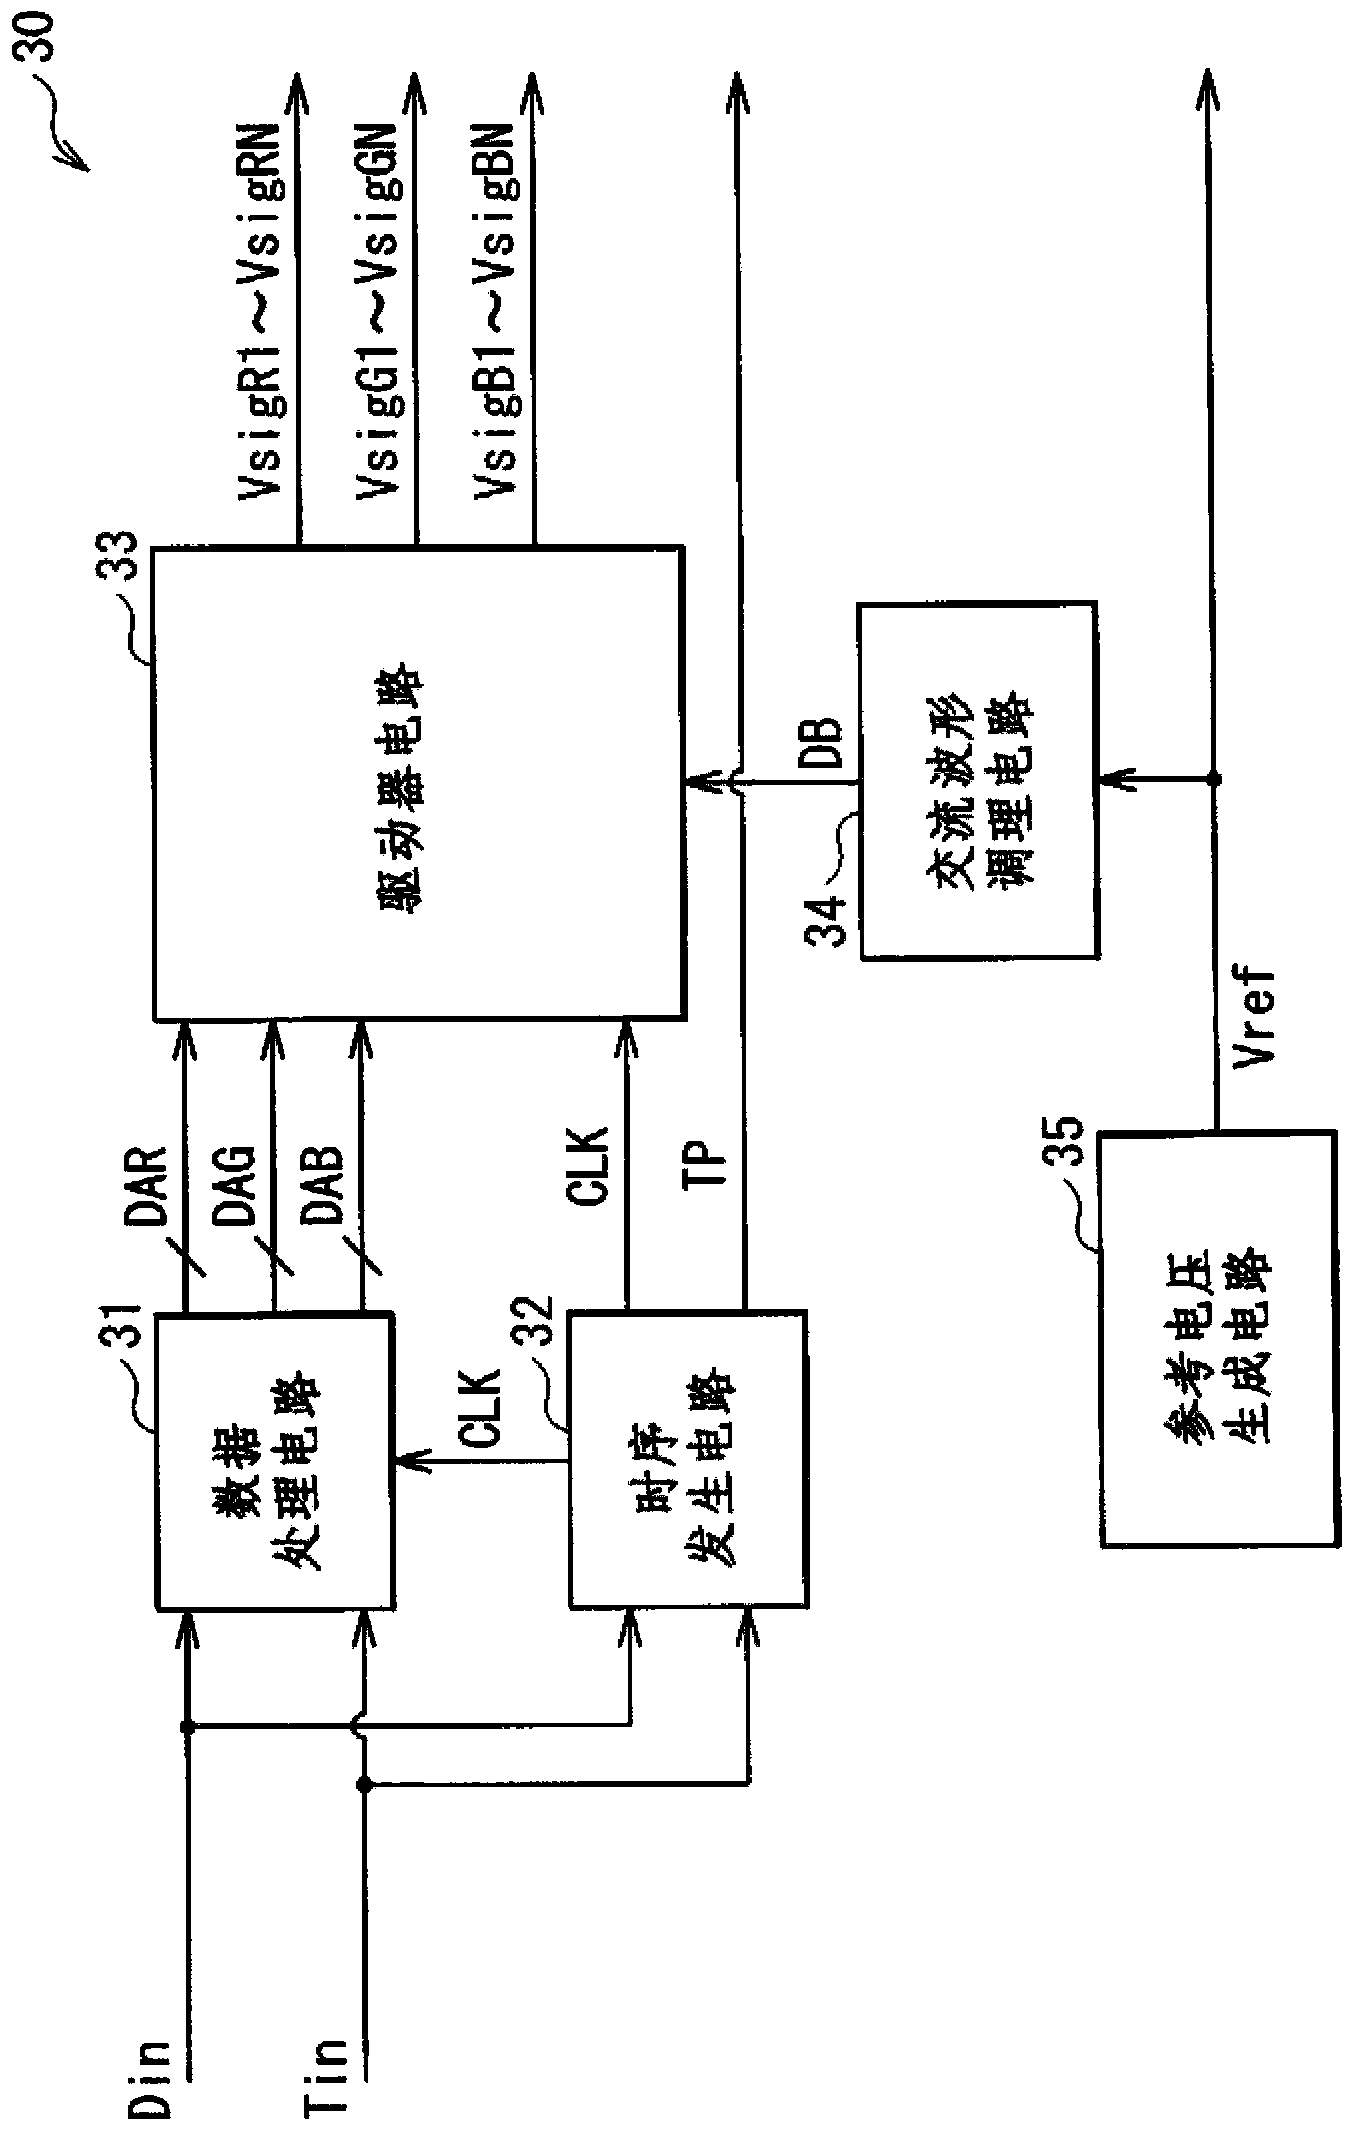 Driver IC, mounting board, display unit, and projection display unit